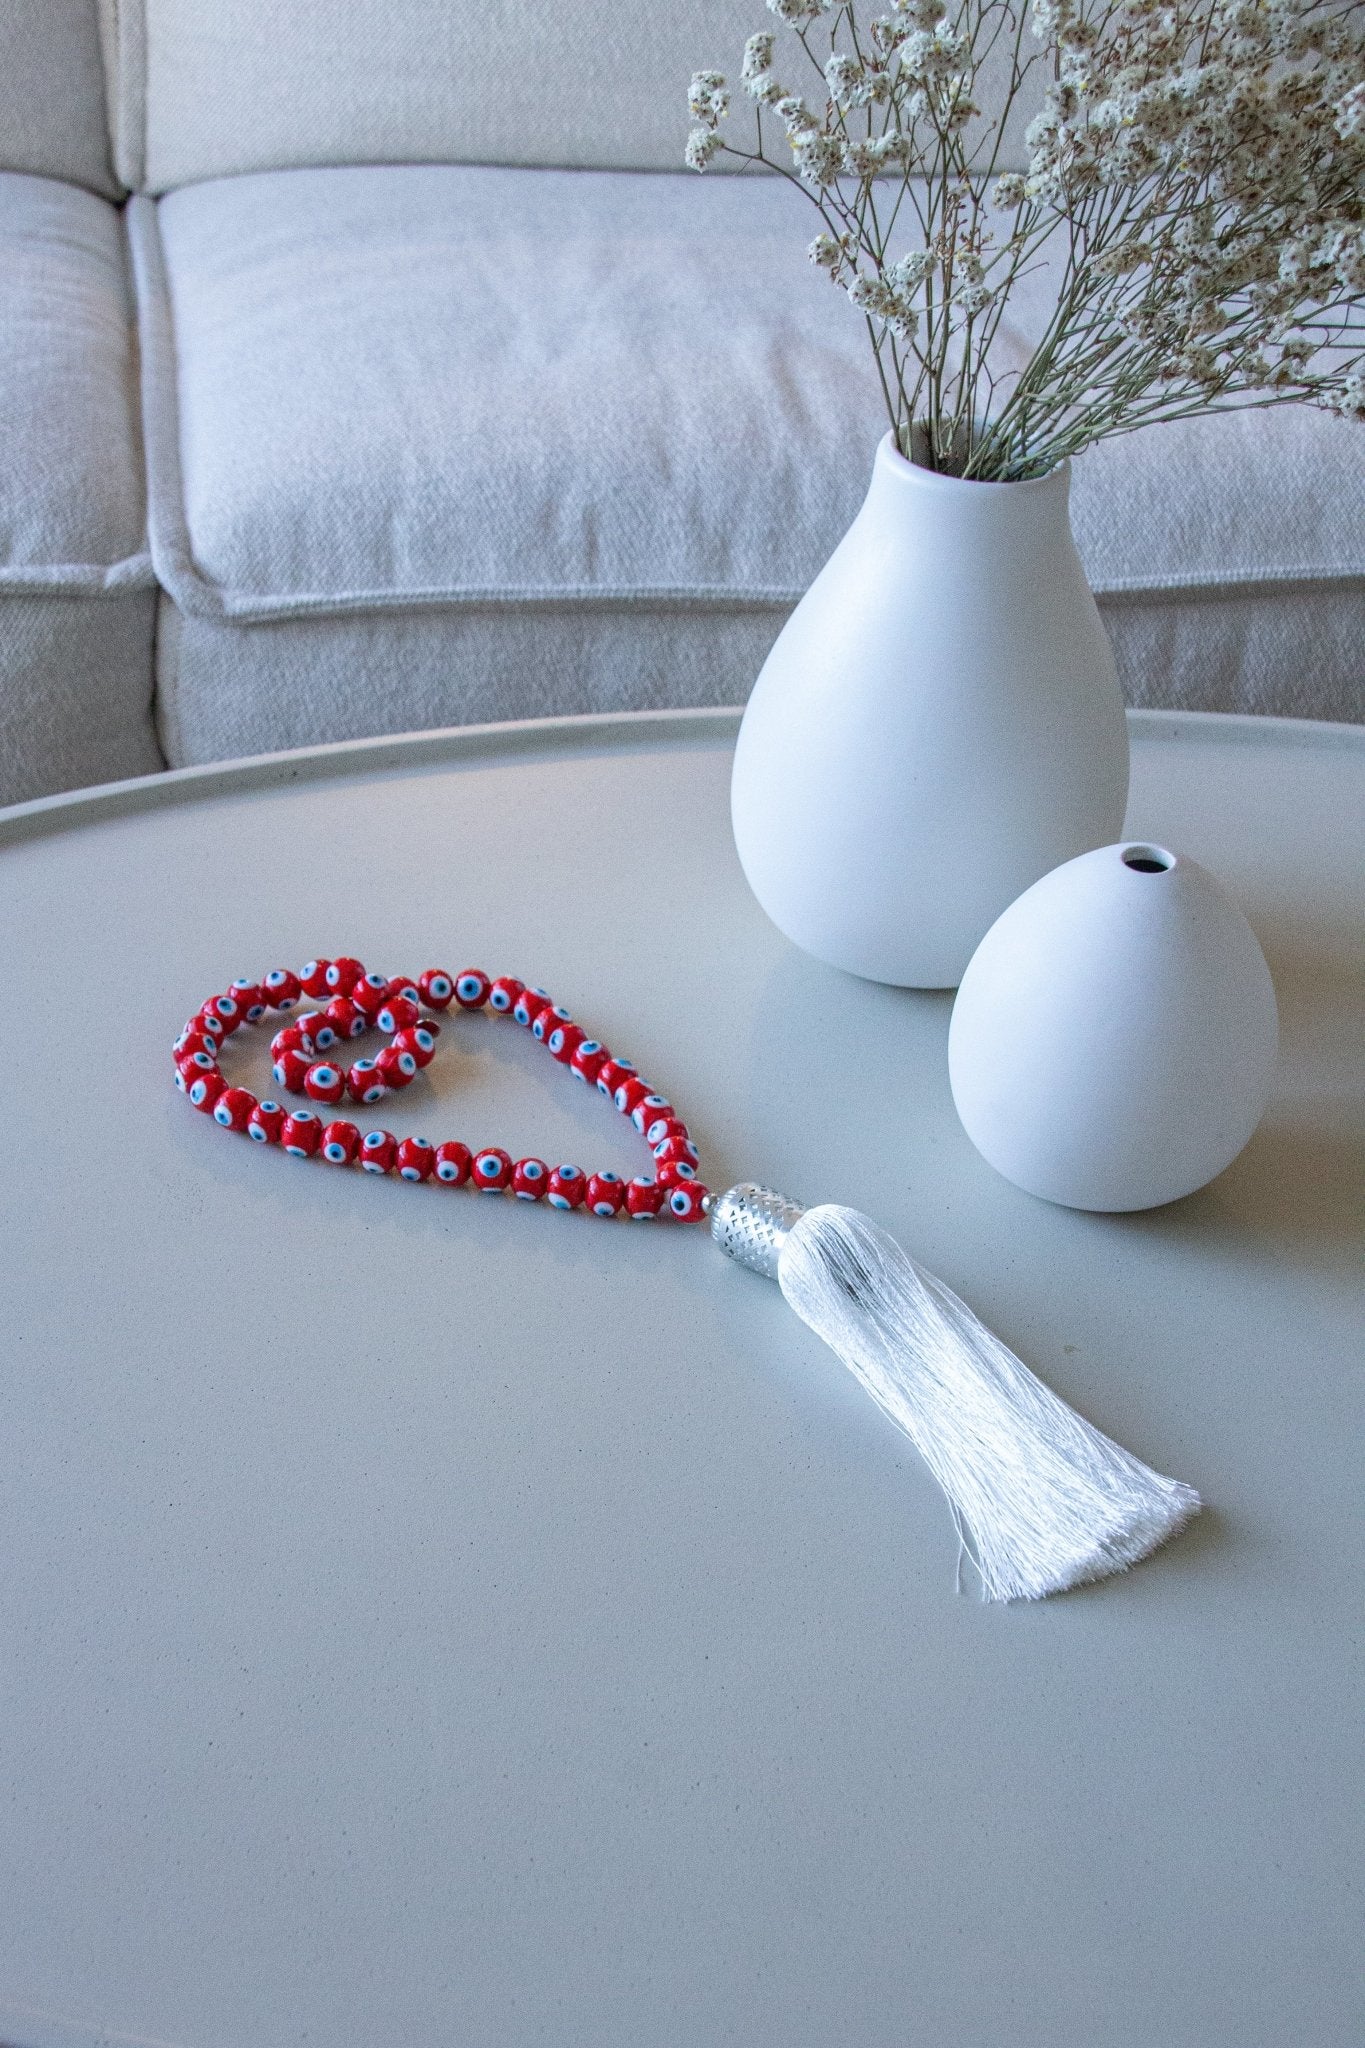 Evil eye glass beads home decor necklace with white silk tassel - Red - Stylish Luck Home Decor | Hamsa \ Hand Of Fatima | Good Luck Gifts